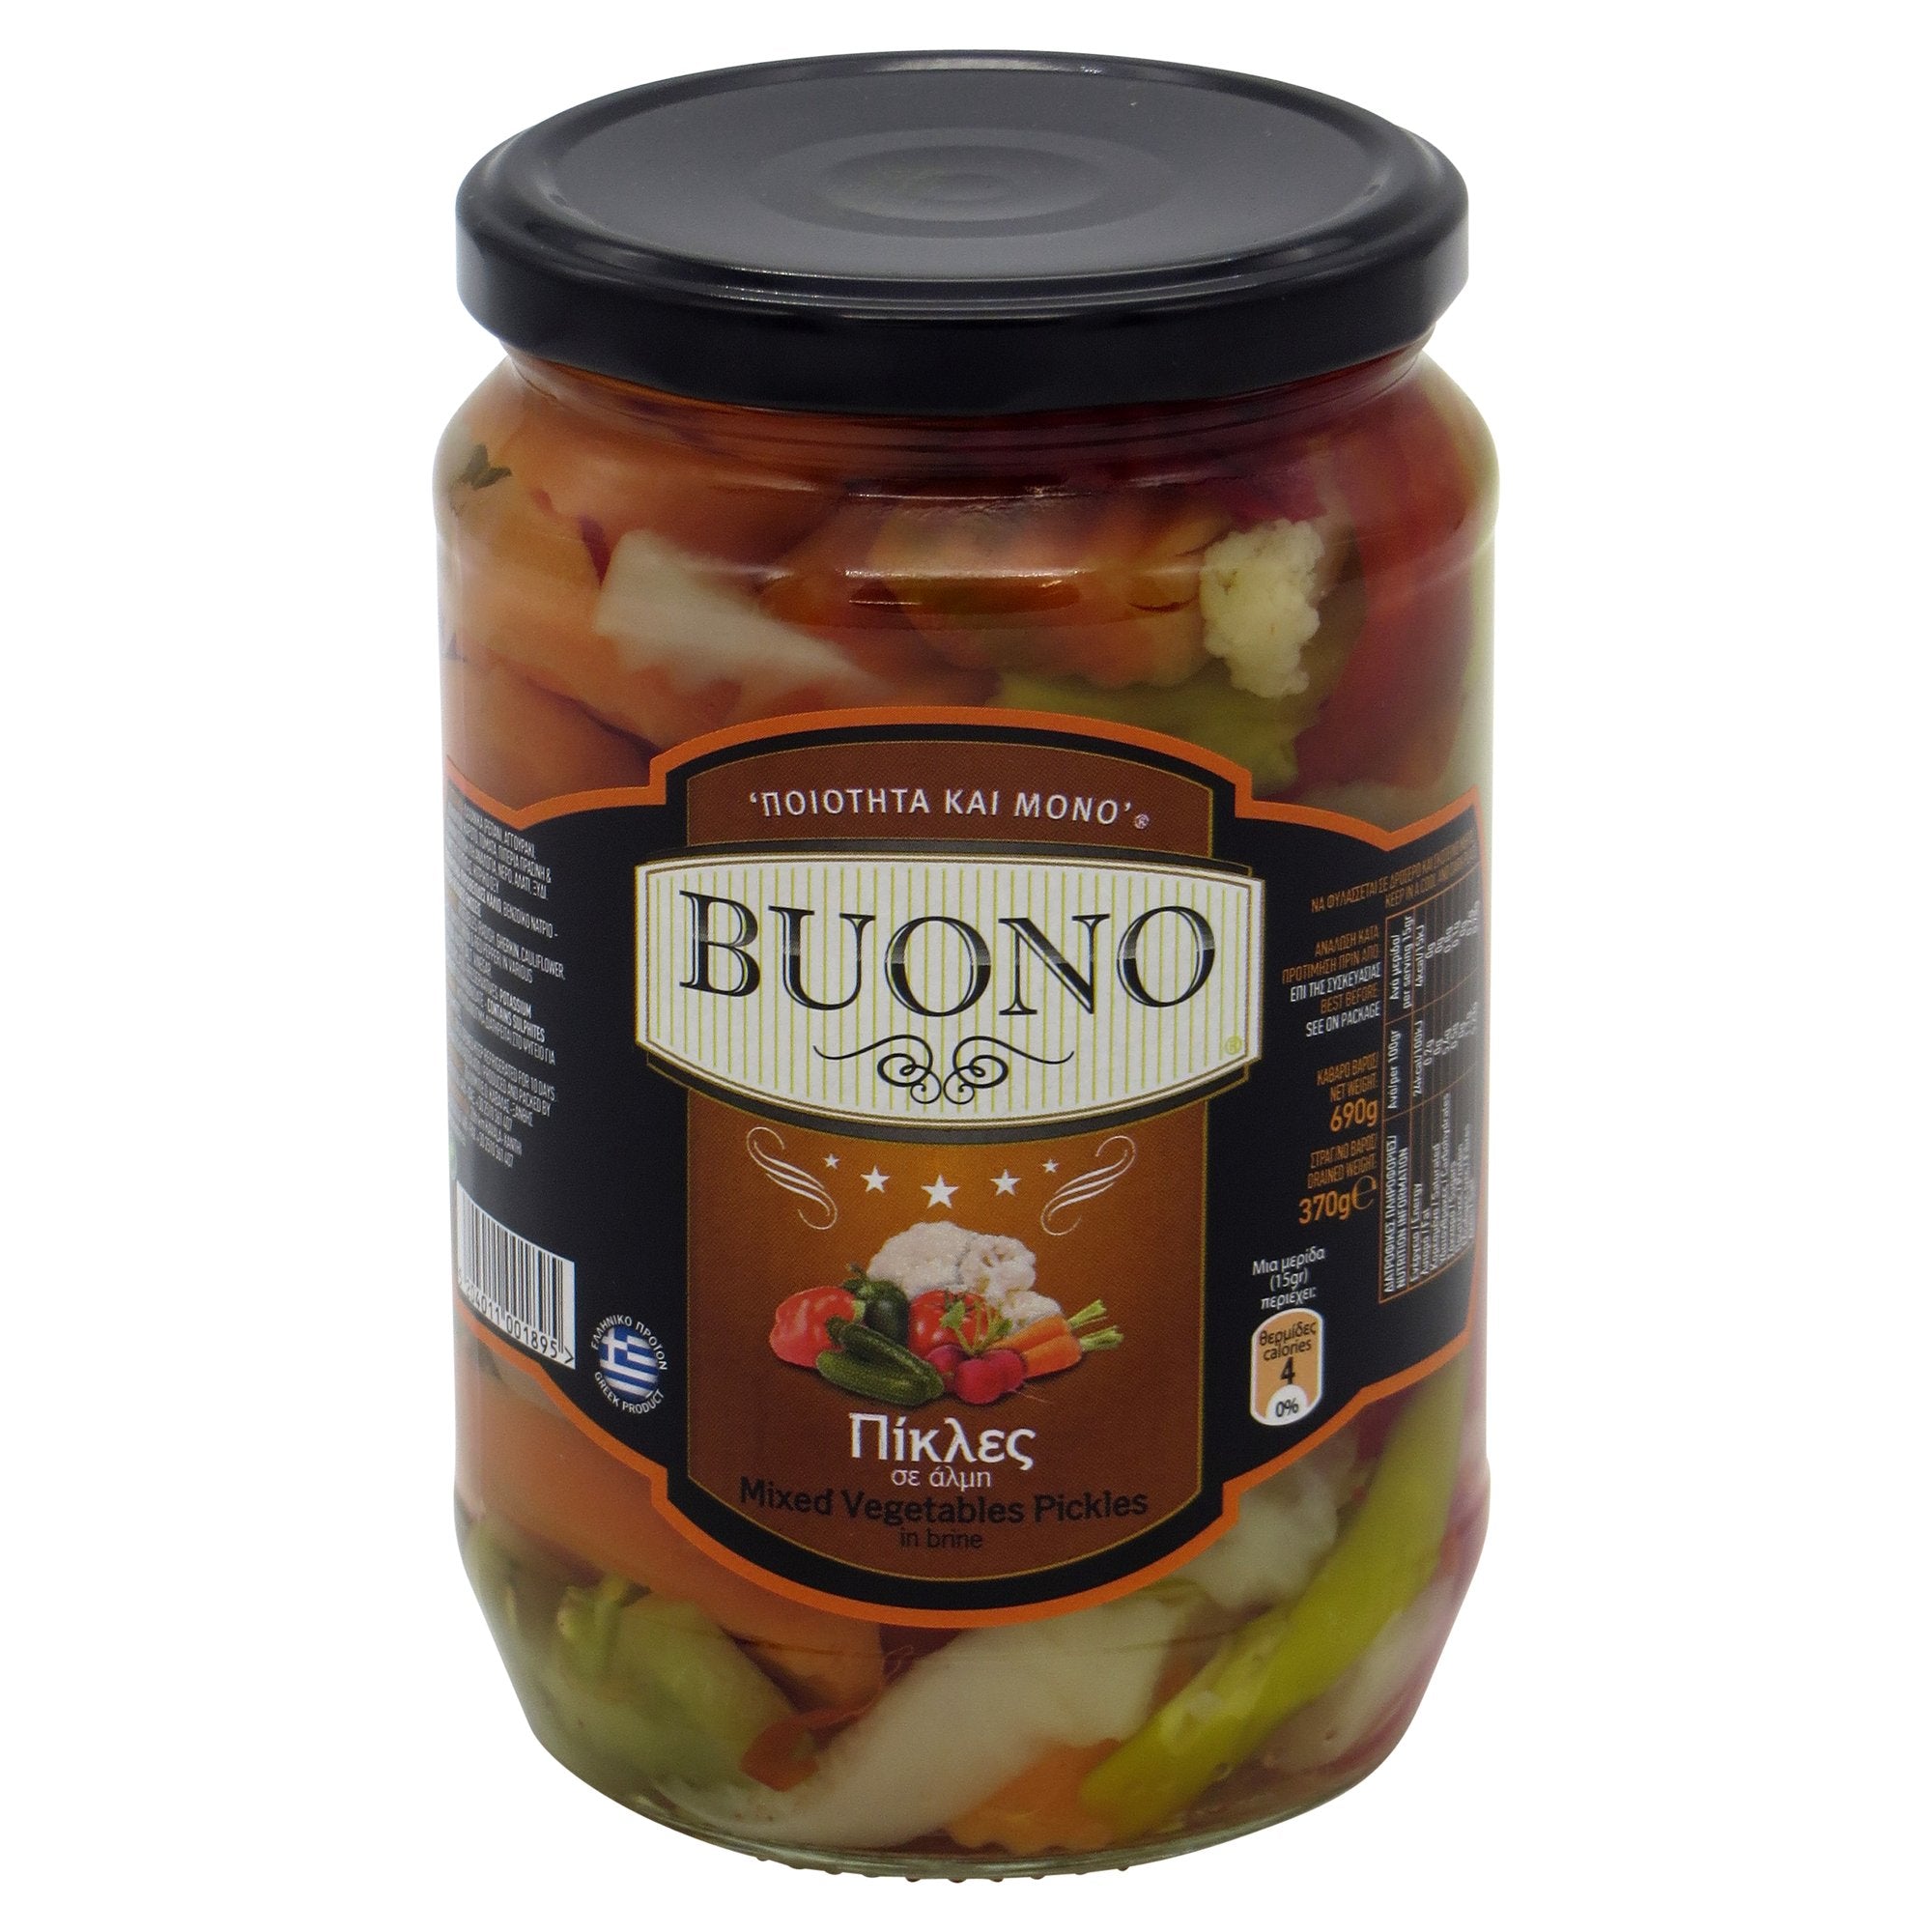 BUONO Mixed Vegetable Pickles 690g